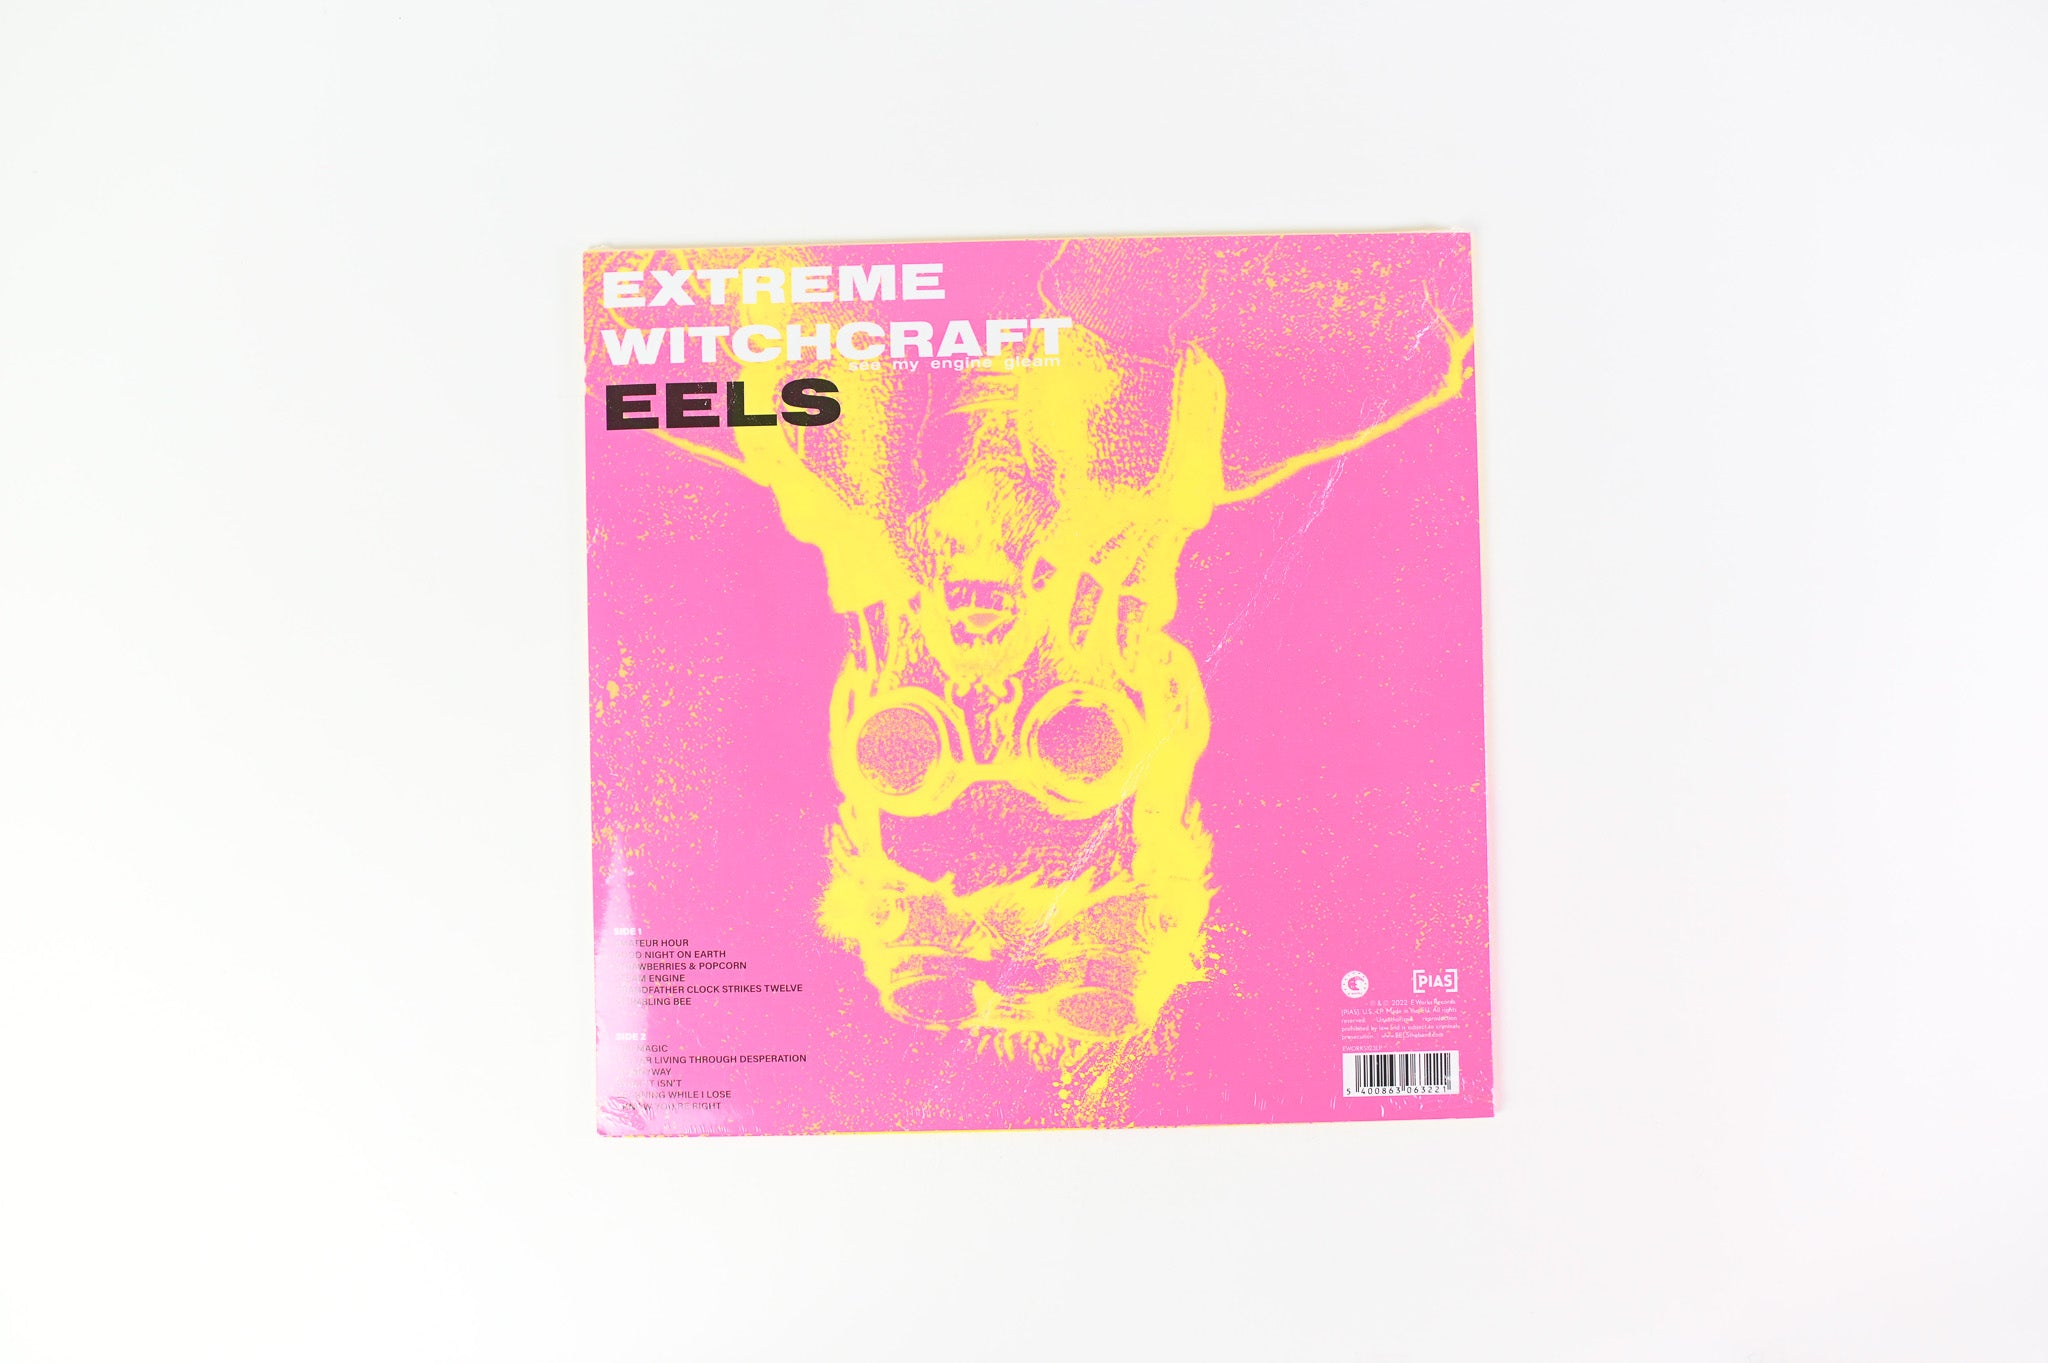 Eels - Extreme Witchcraft (See My Engine Gleam) on E Works Sealed